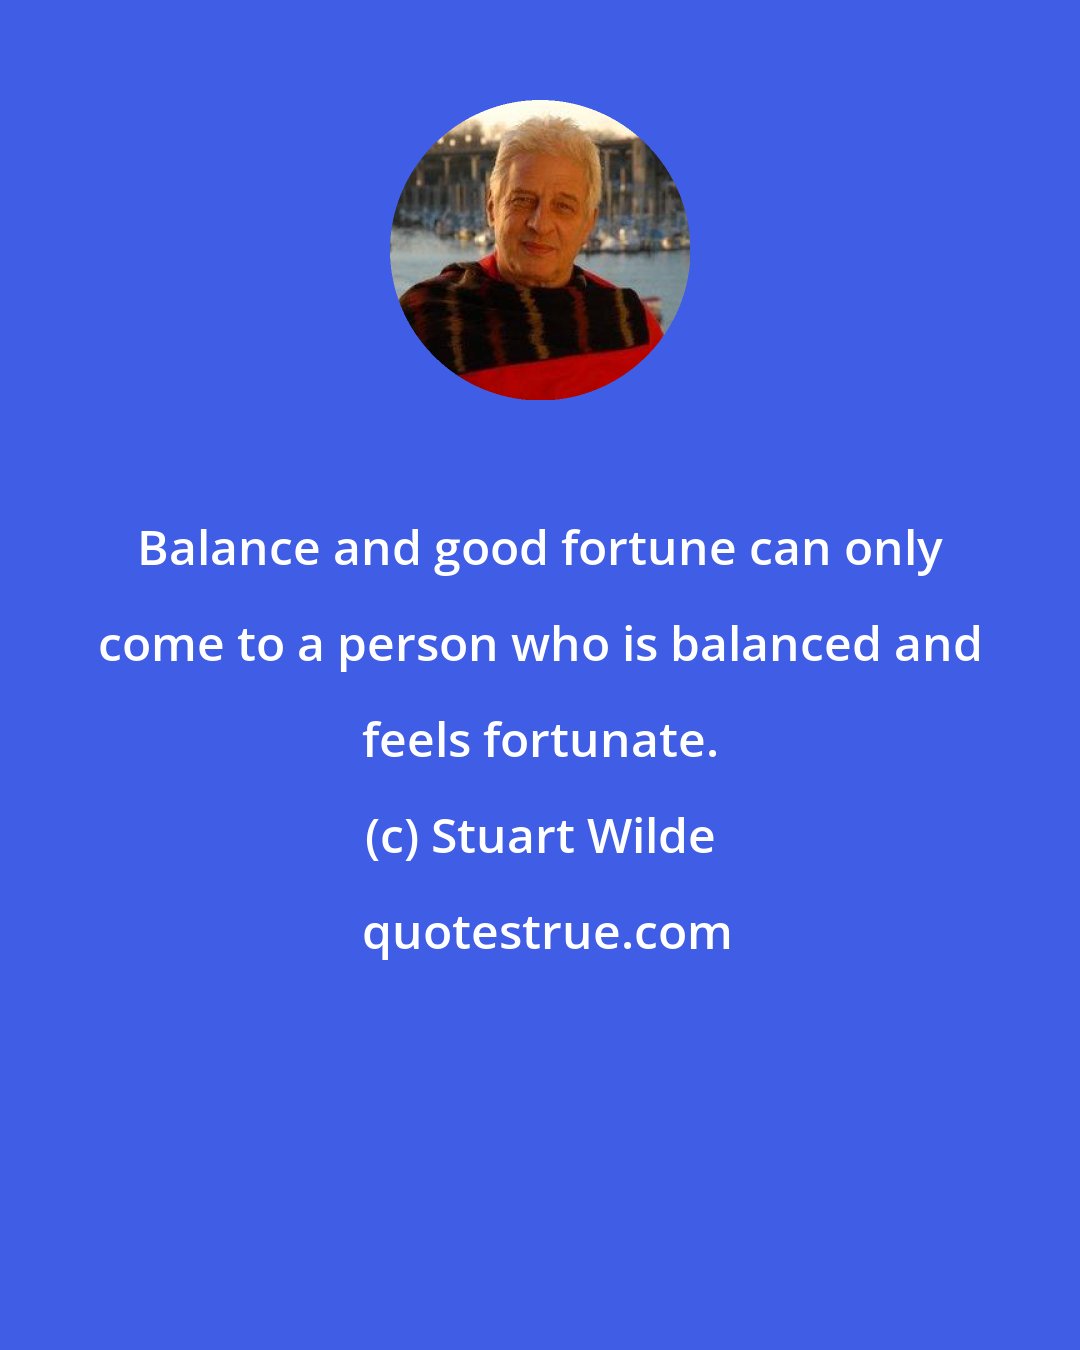 Stuart Wilde: Balance and good fortune can only come to a person who is balanced and feels fortunate.